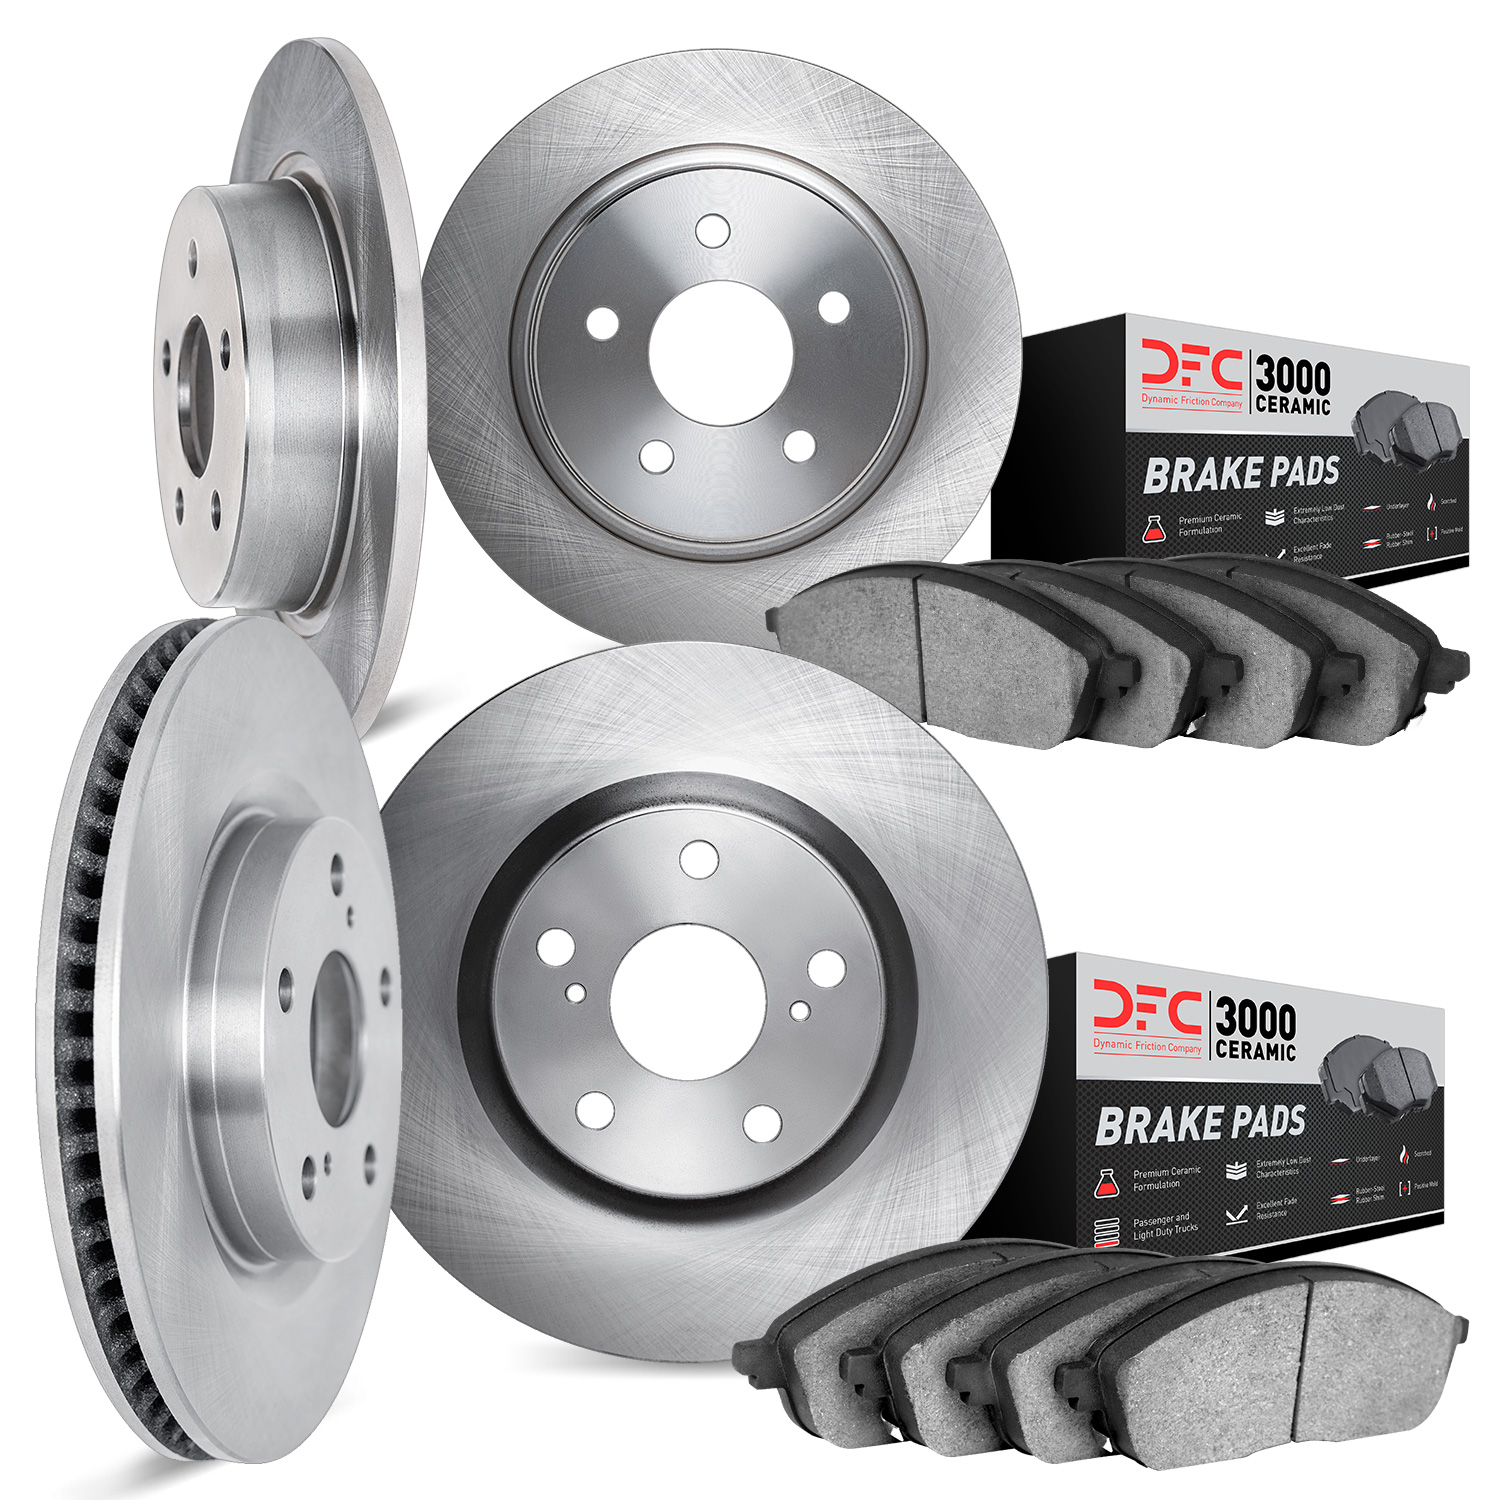 6304-42020 Brake Rotors with 3000-Series Ceramic Brake Pads Kit, Fits Select Mopar, Position: Front and Rear